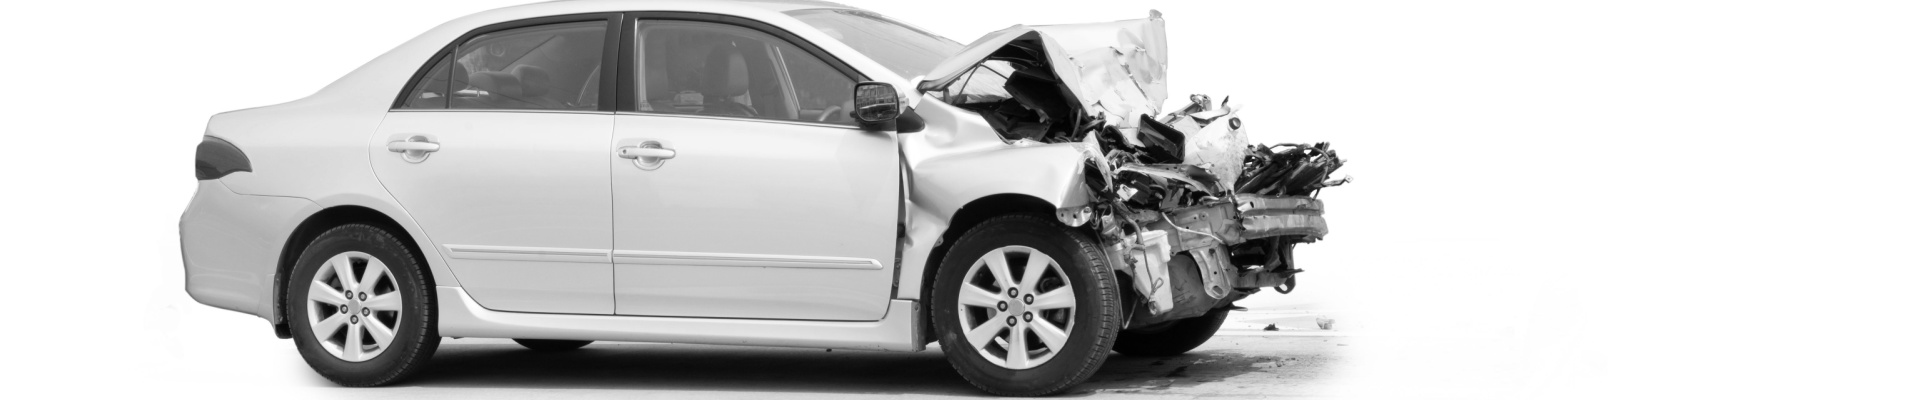 Oroville Uber Accident Lawyer